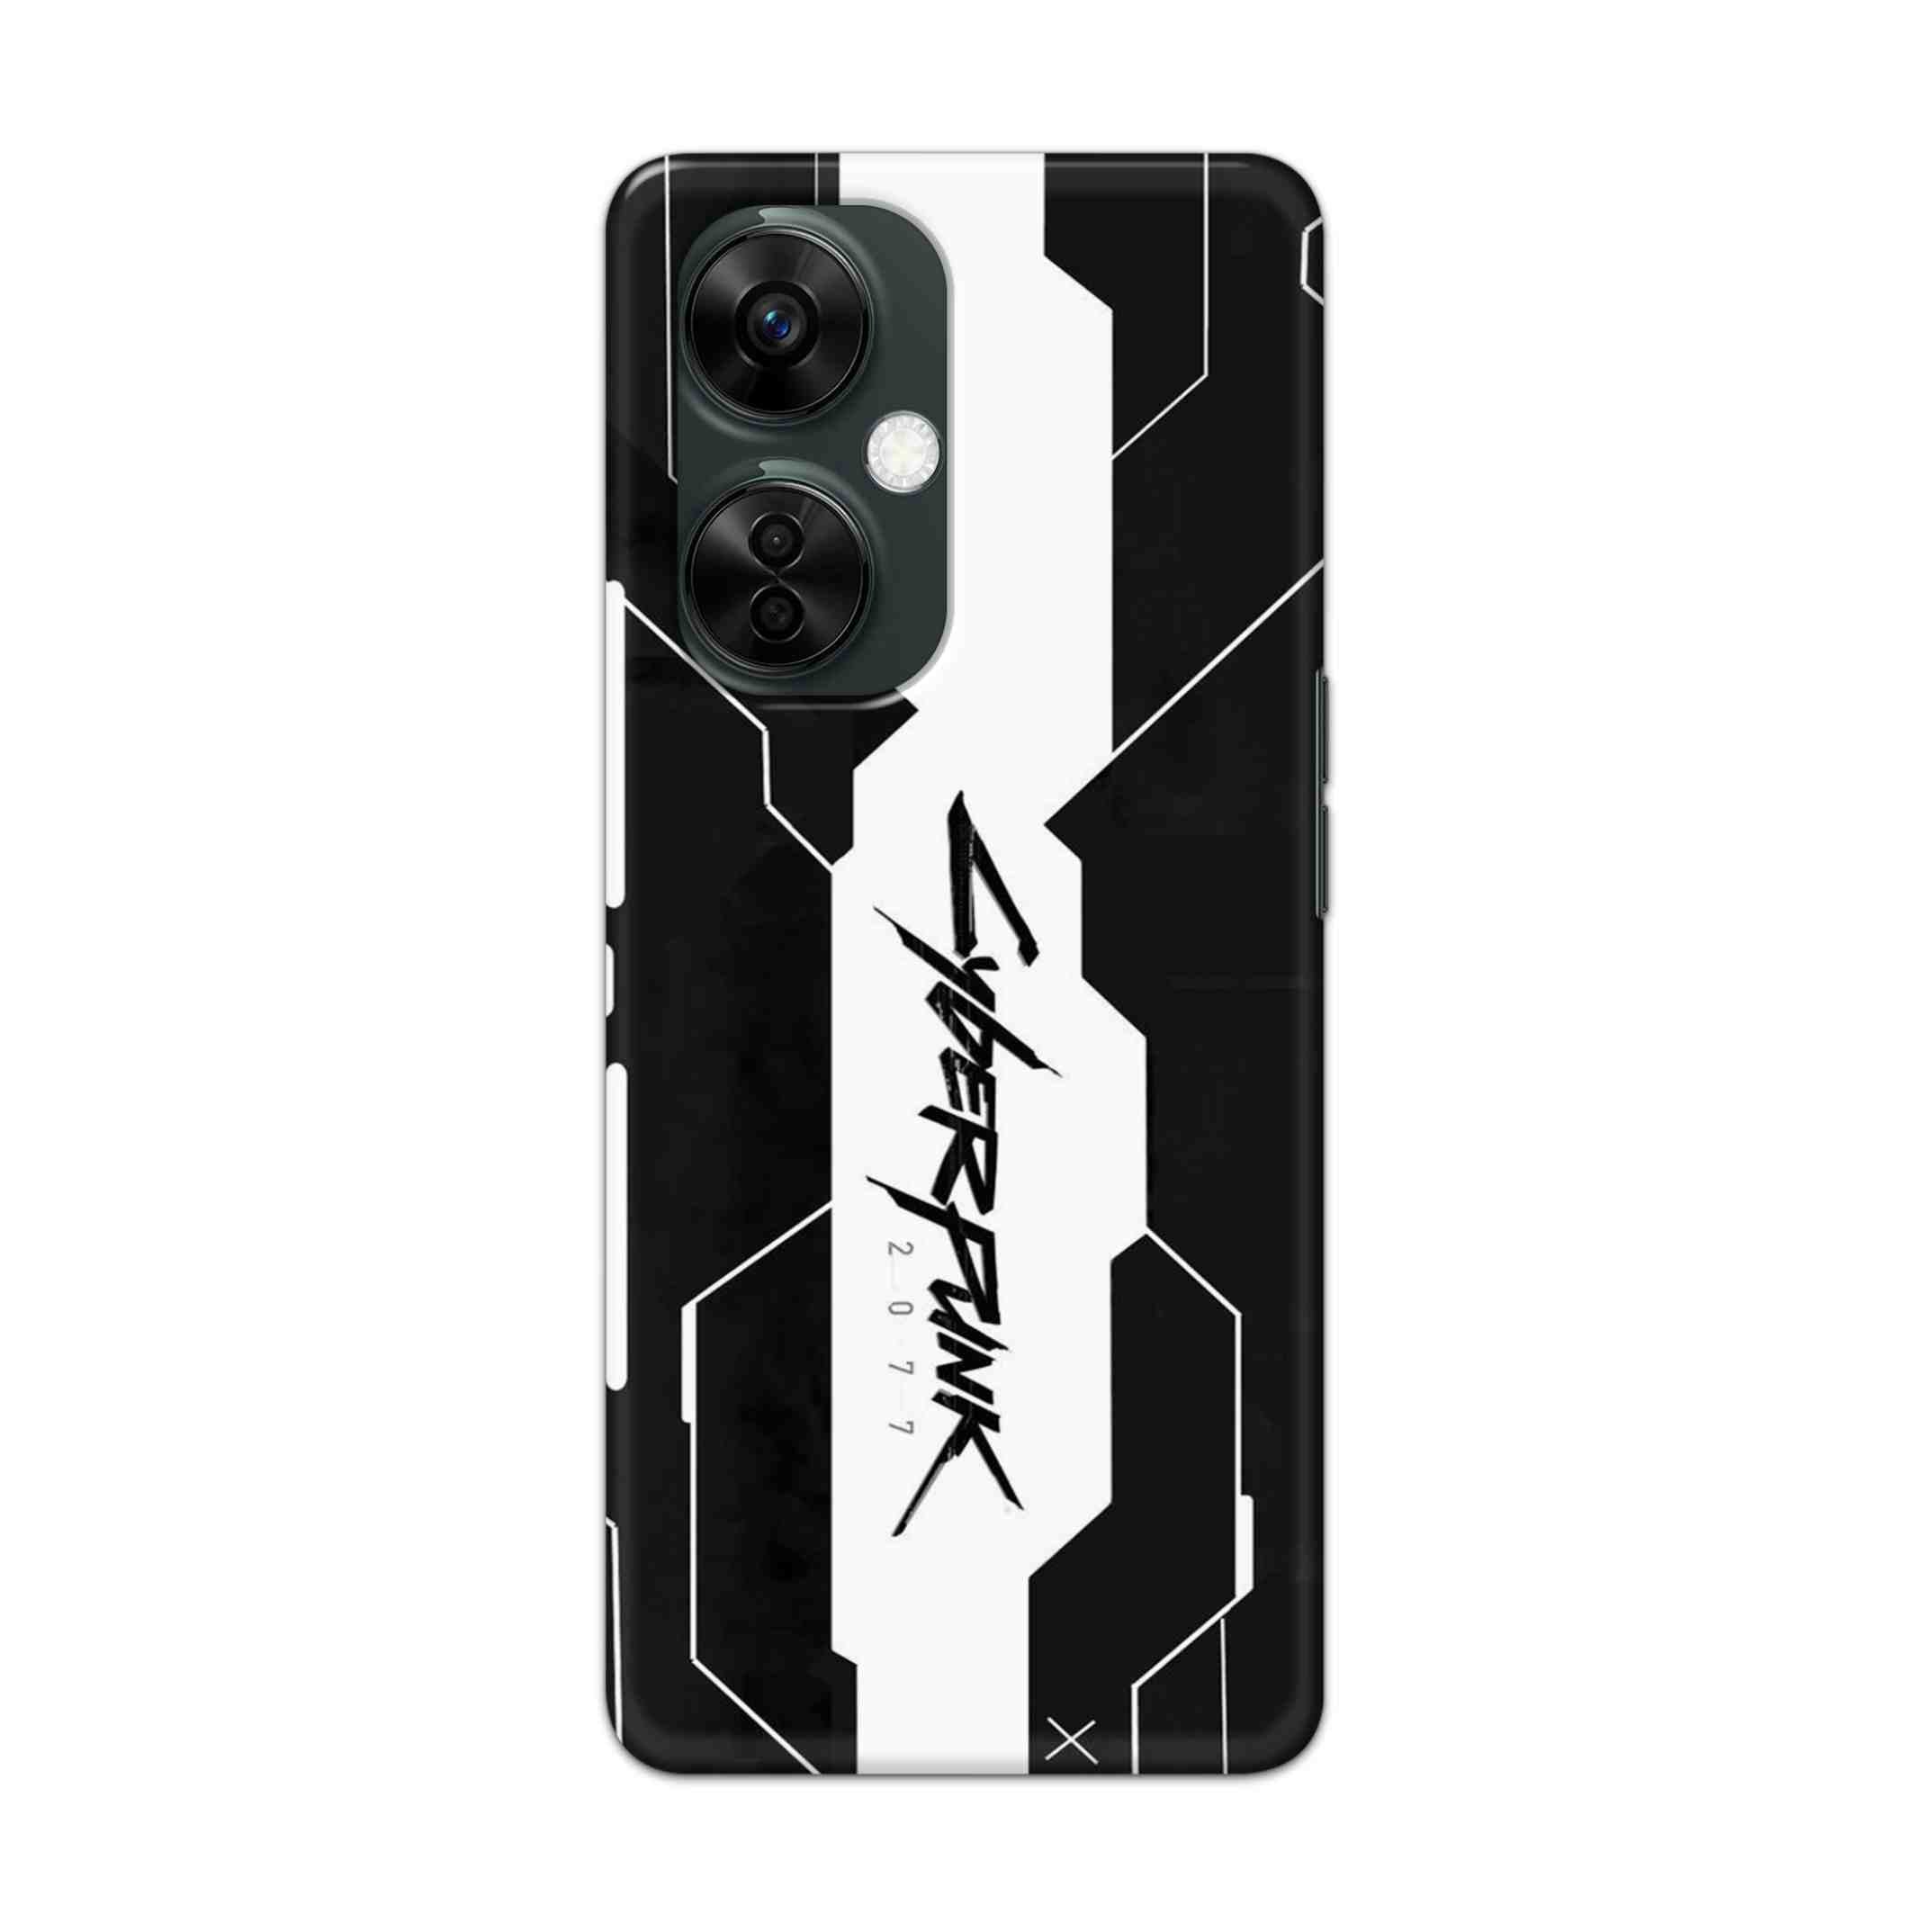 Buy Cyberpunk 2077 Art Hard Back Mobile Phone Case Cover For Oneplus Nord CE 3 Lite Online